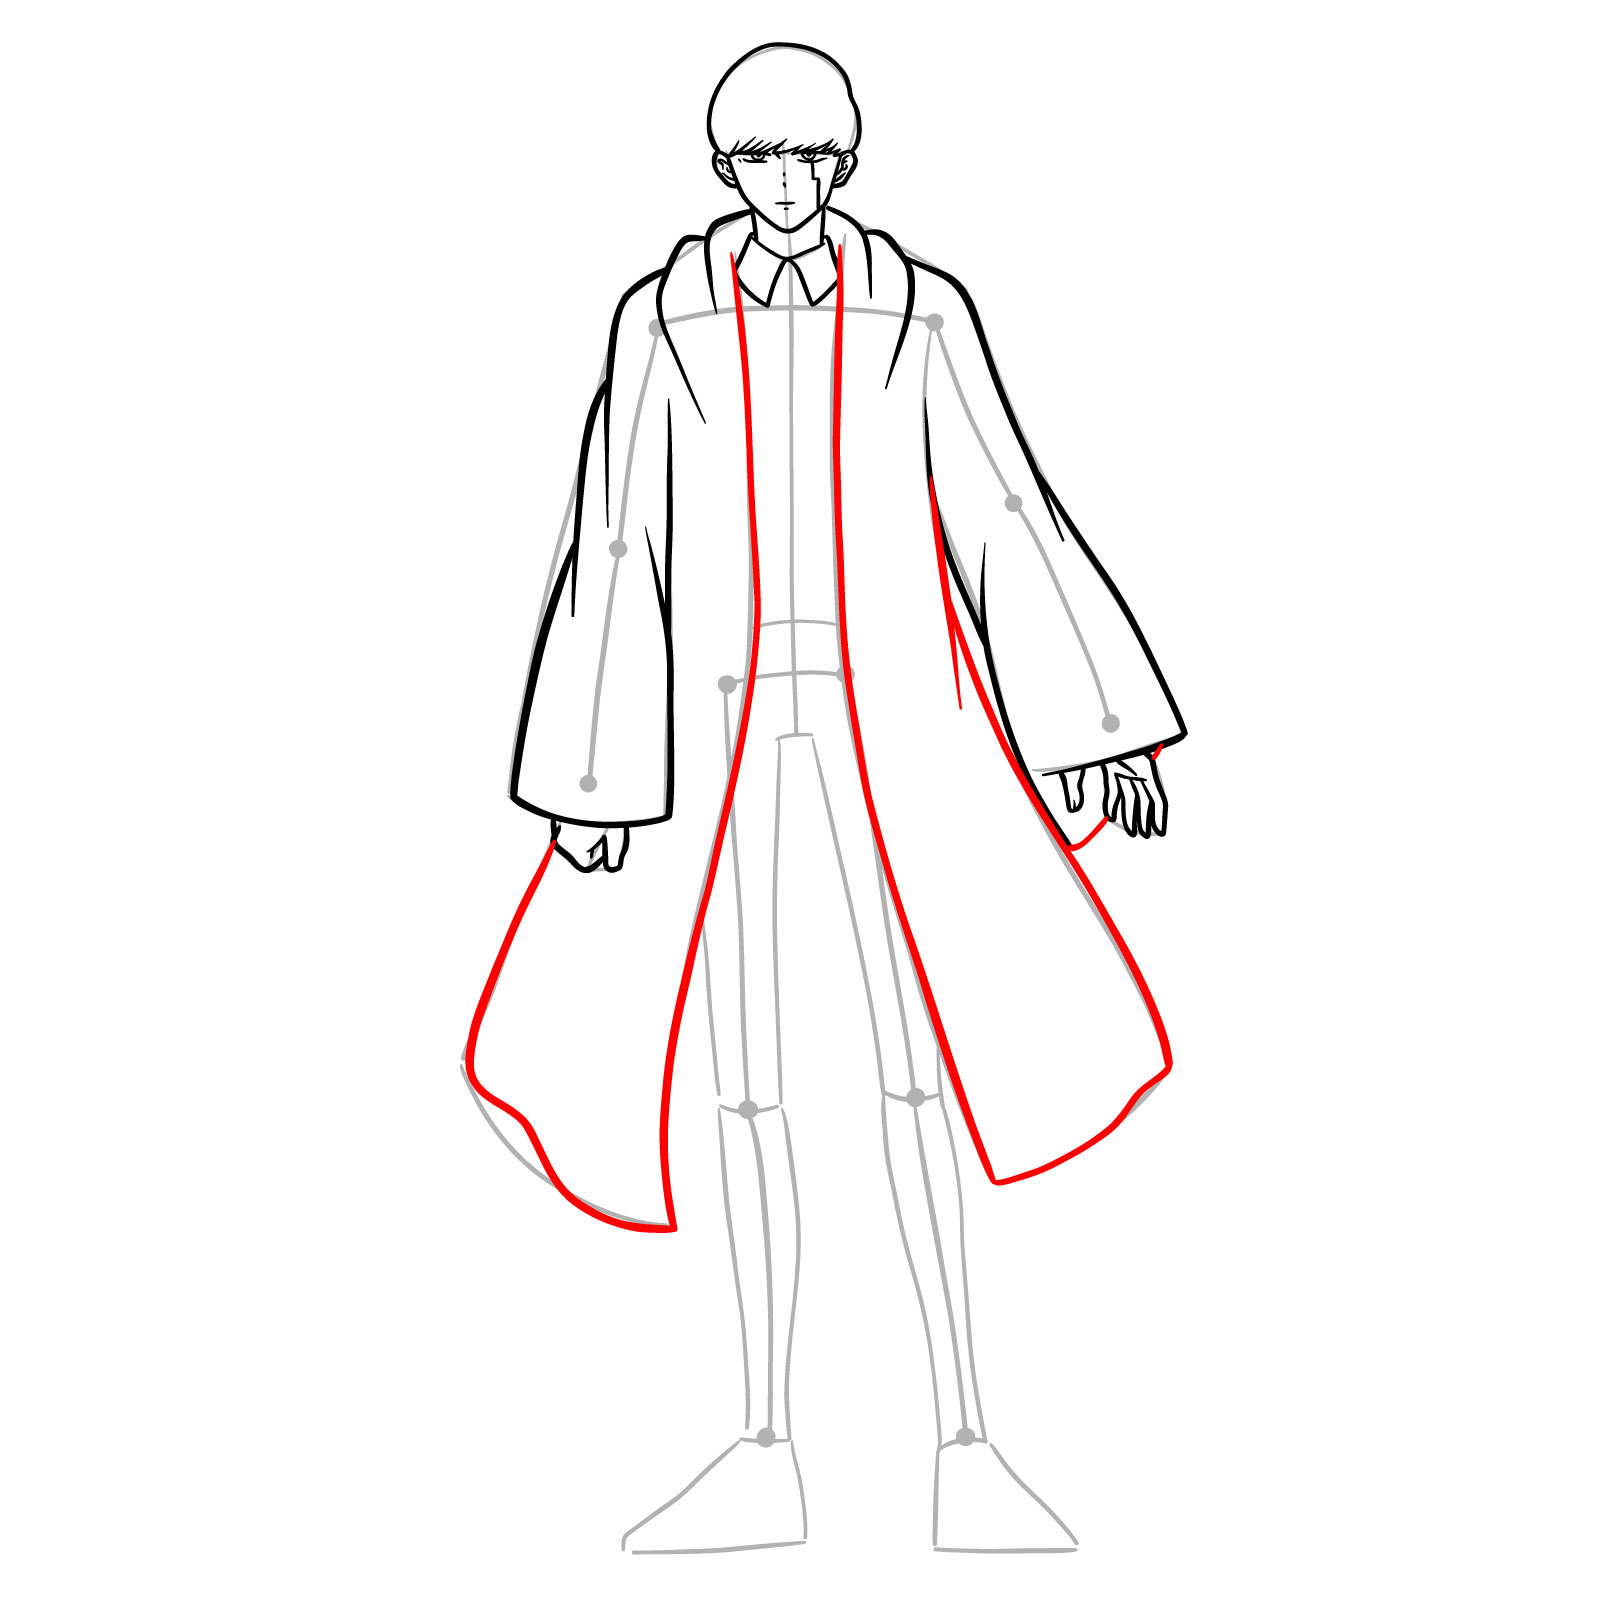 Final touches on Mash's cloak in a detailed full body drawing guide - step 12